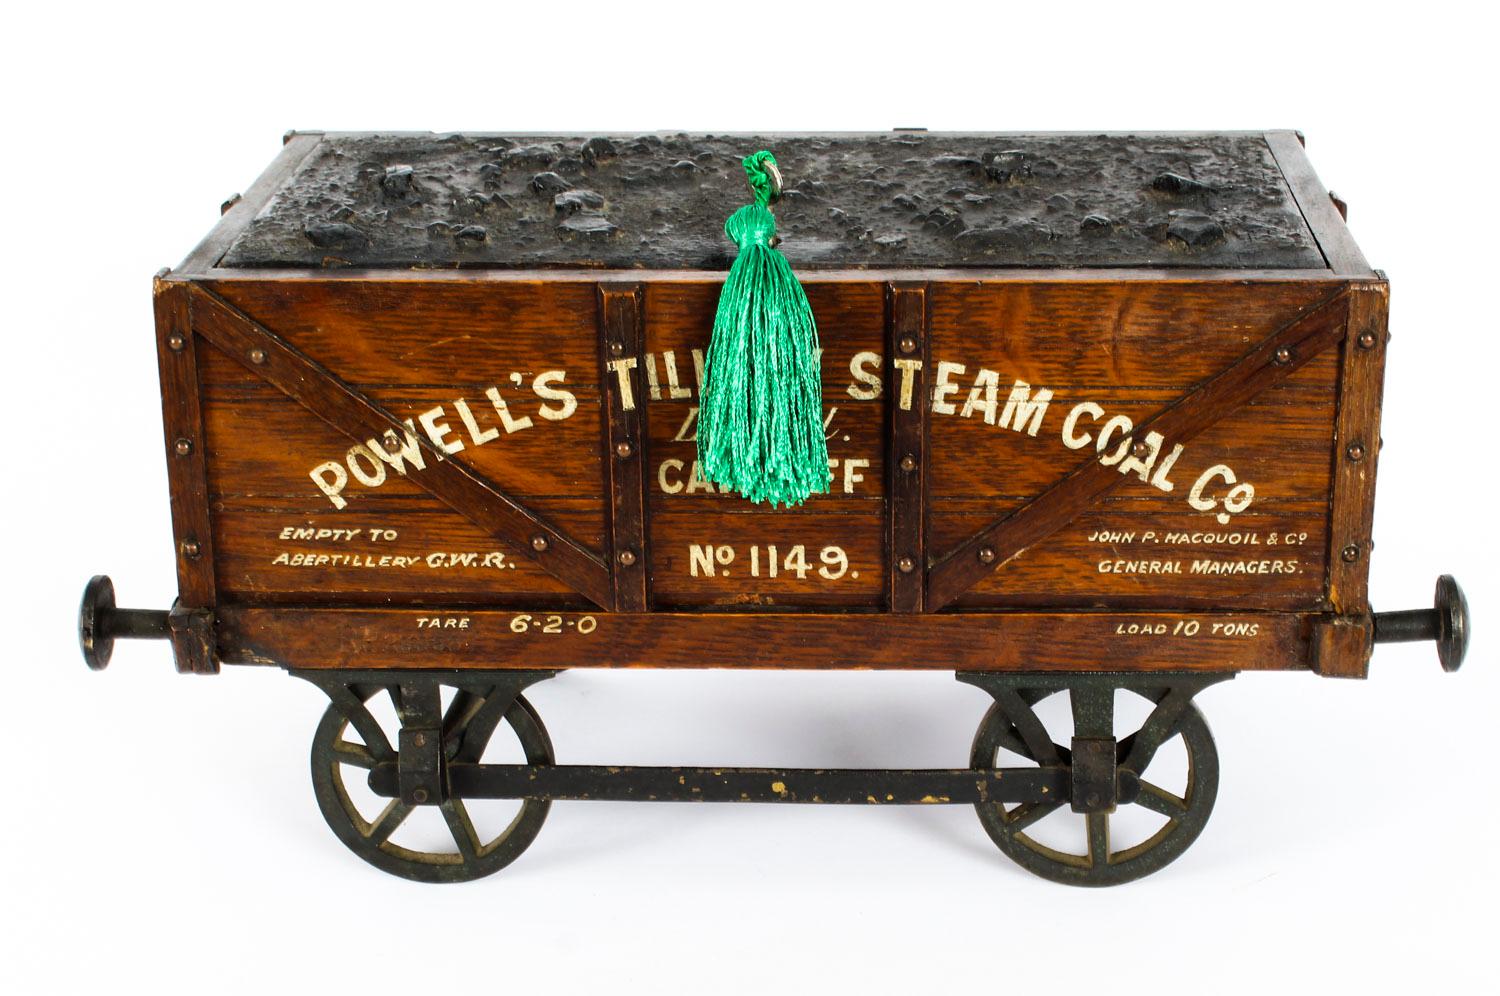 An unusual antique English oak novelty railway interest cigar humidor, circa 1880 in date.

The humidor is constructed in the form of a train's coal wagon. 

It features a simulated coal locking lift up top with a paneled body